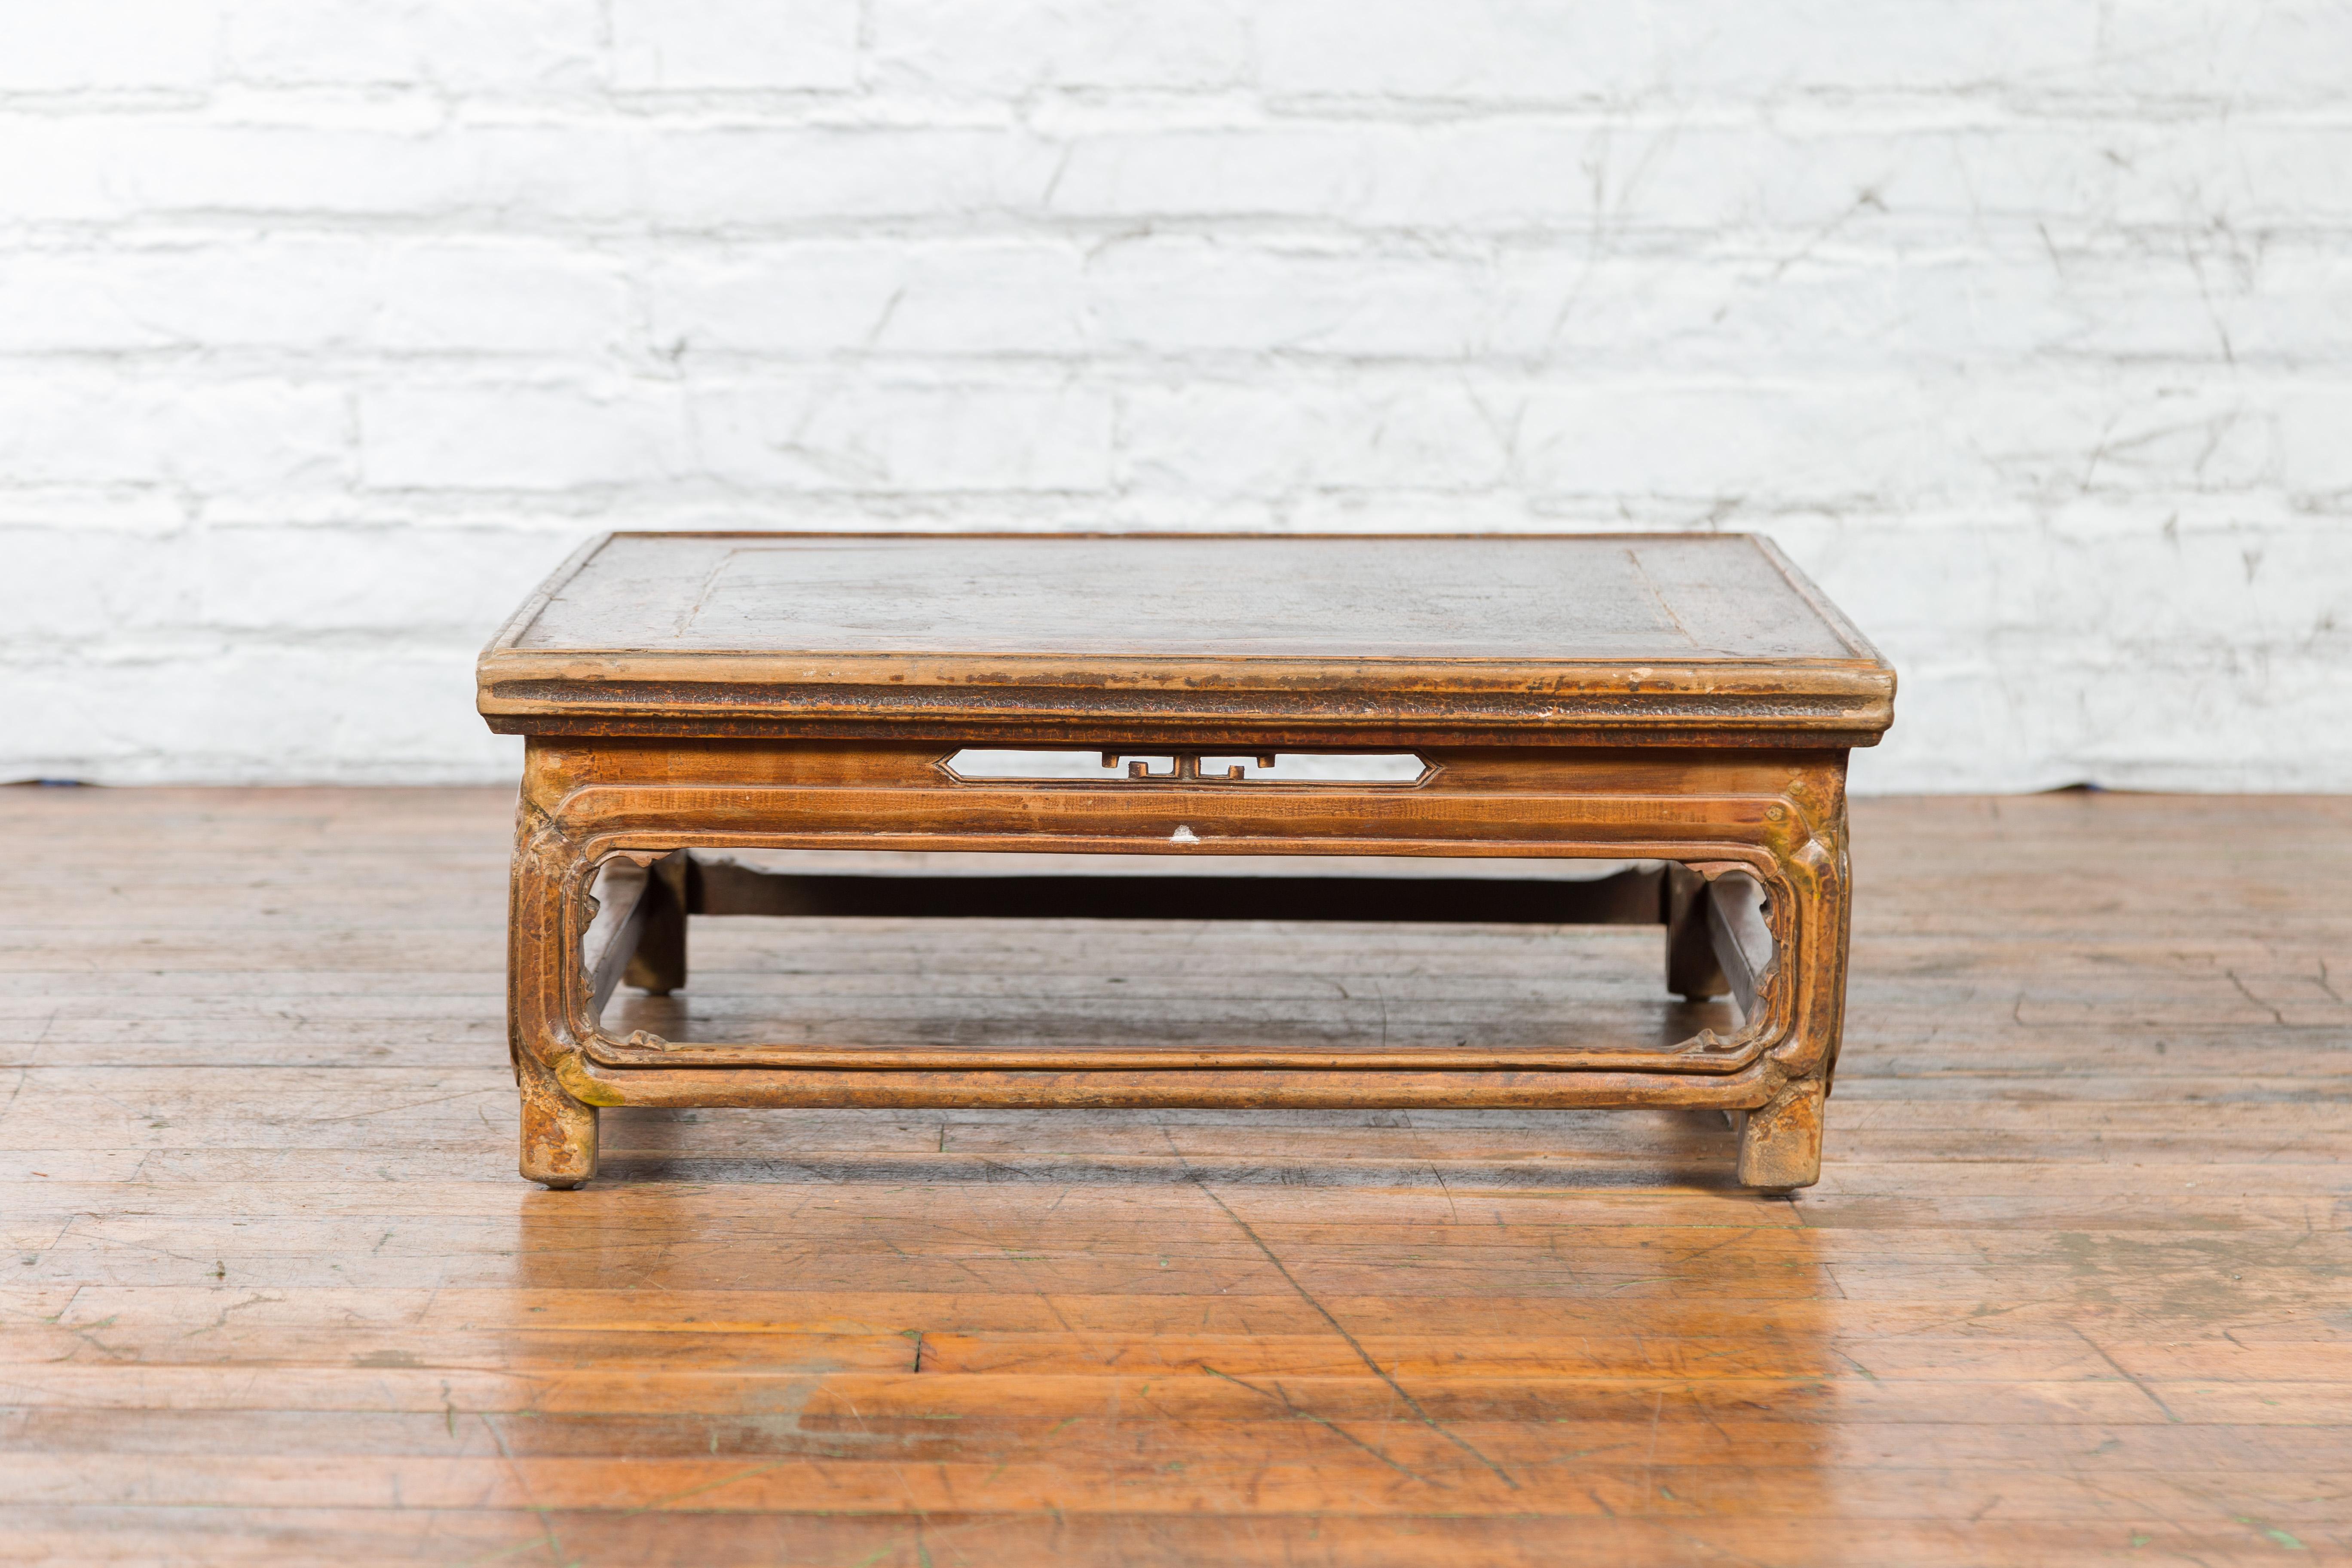 Wood Qing Dynasty 19th Century Chinese Low Kang Coffee Table with Painted Décor For Sale